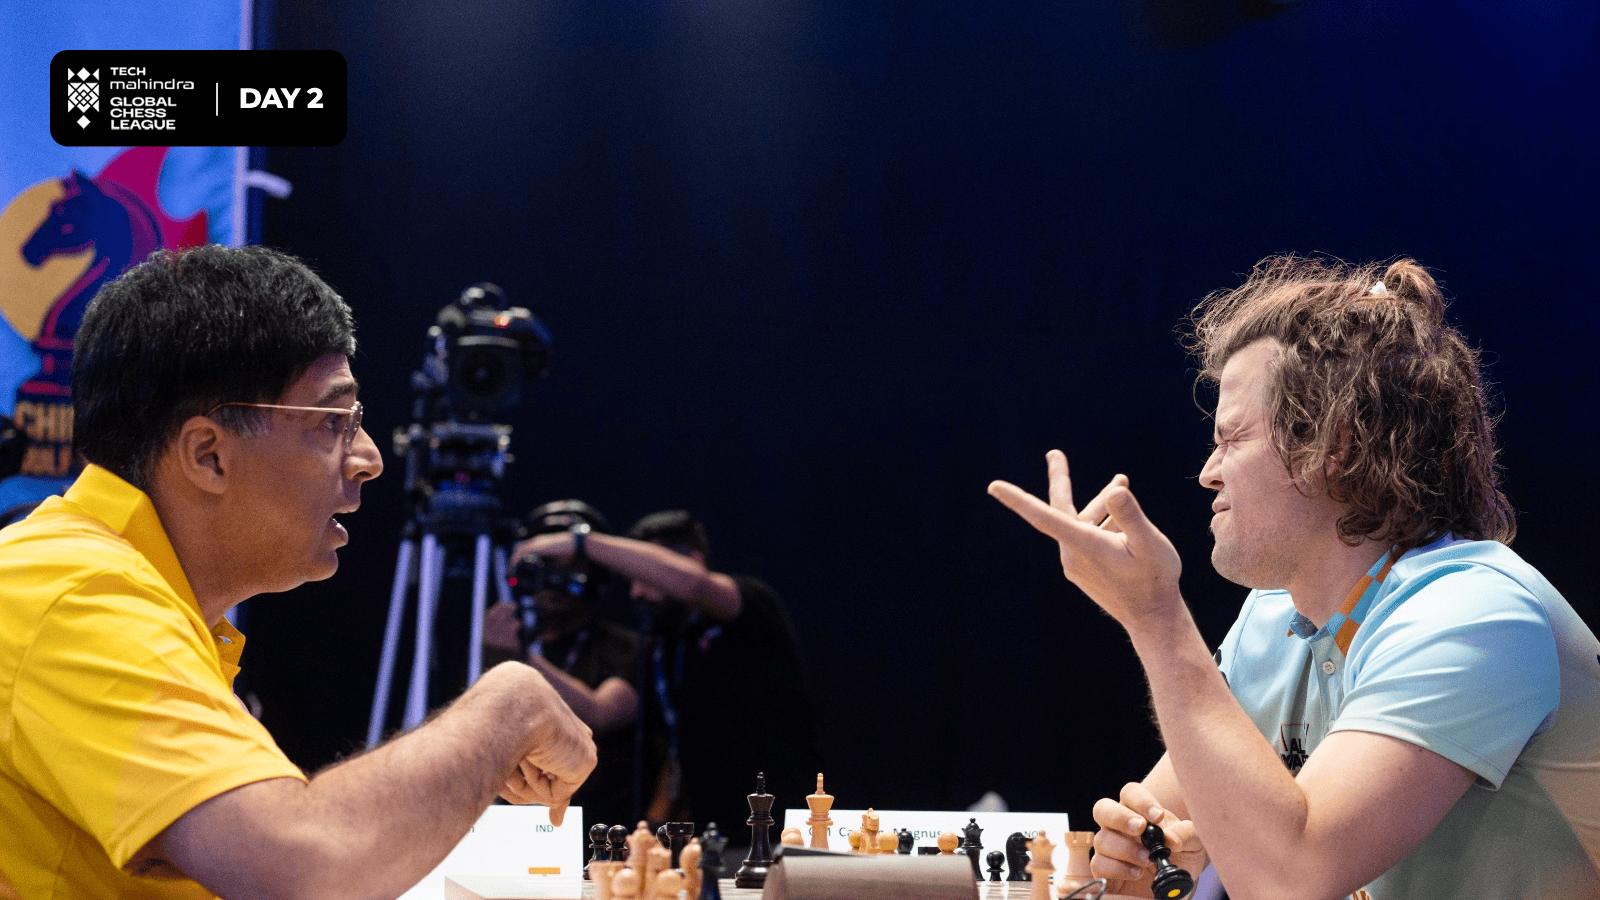 GCL Day 7: Carlsen wins an exquisite endgame against Anand